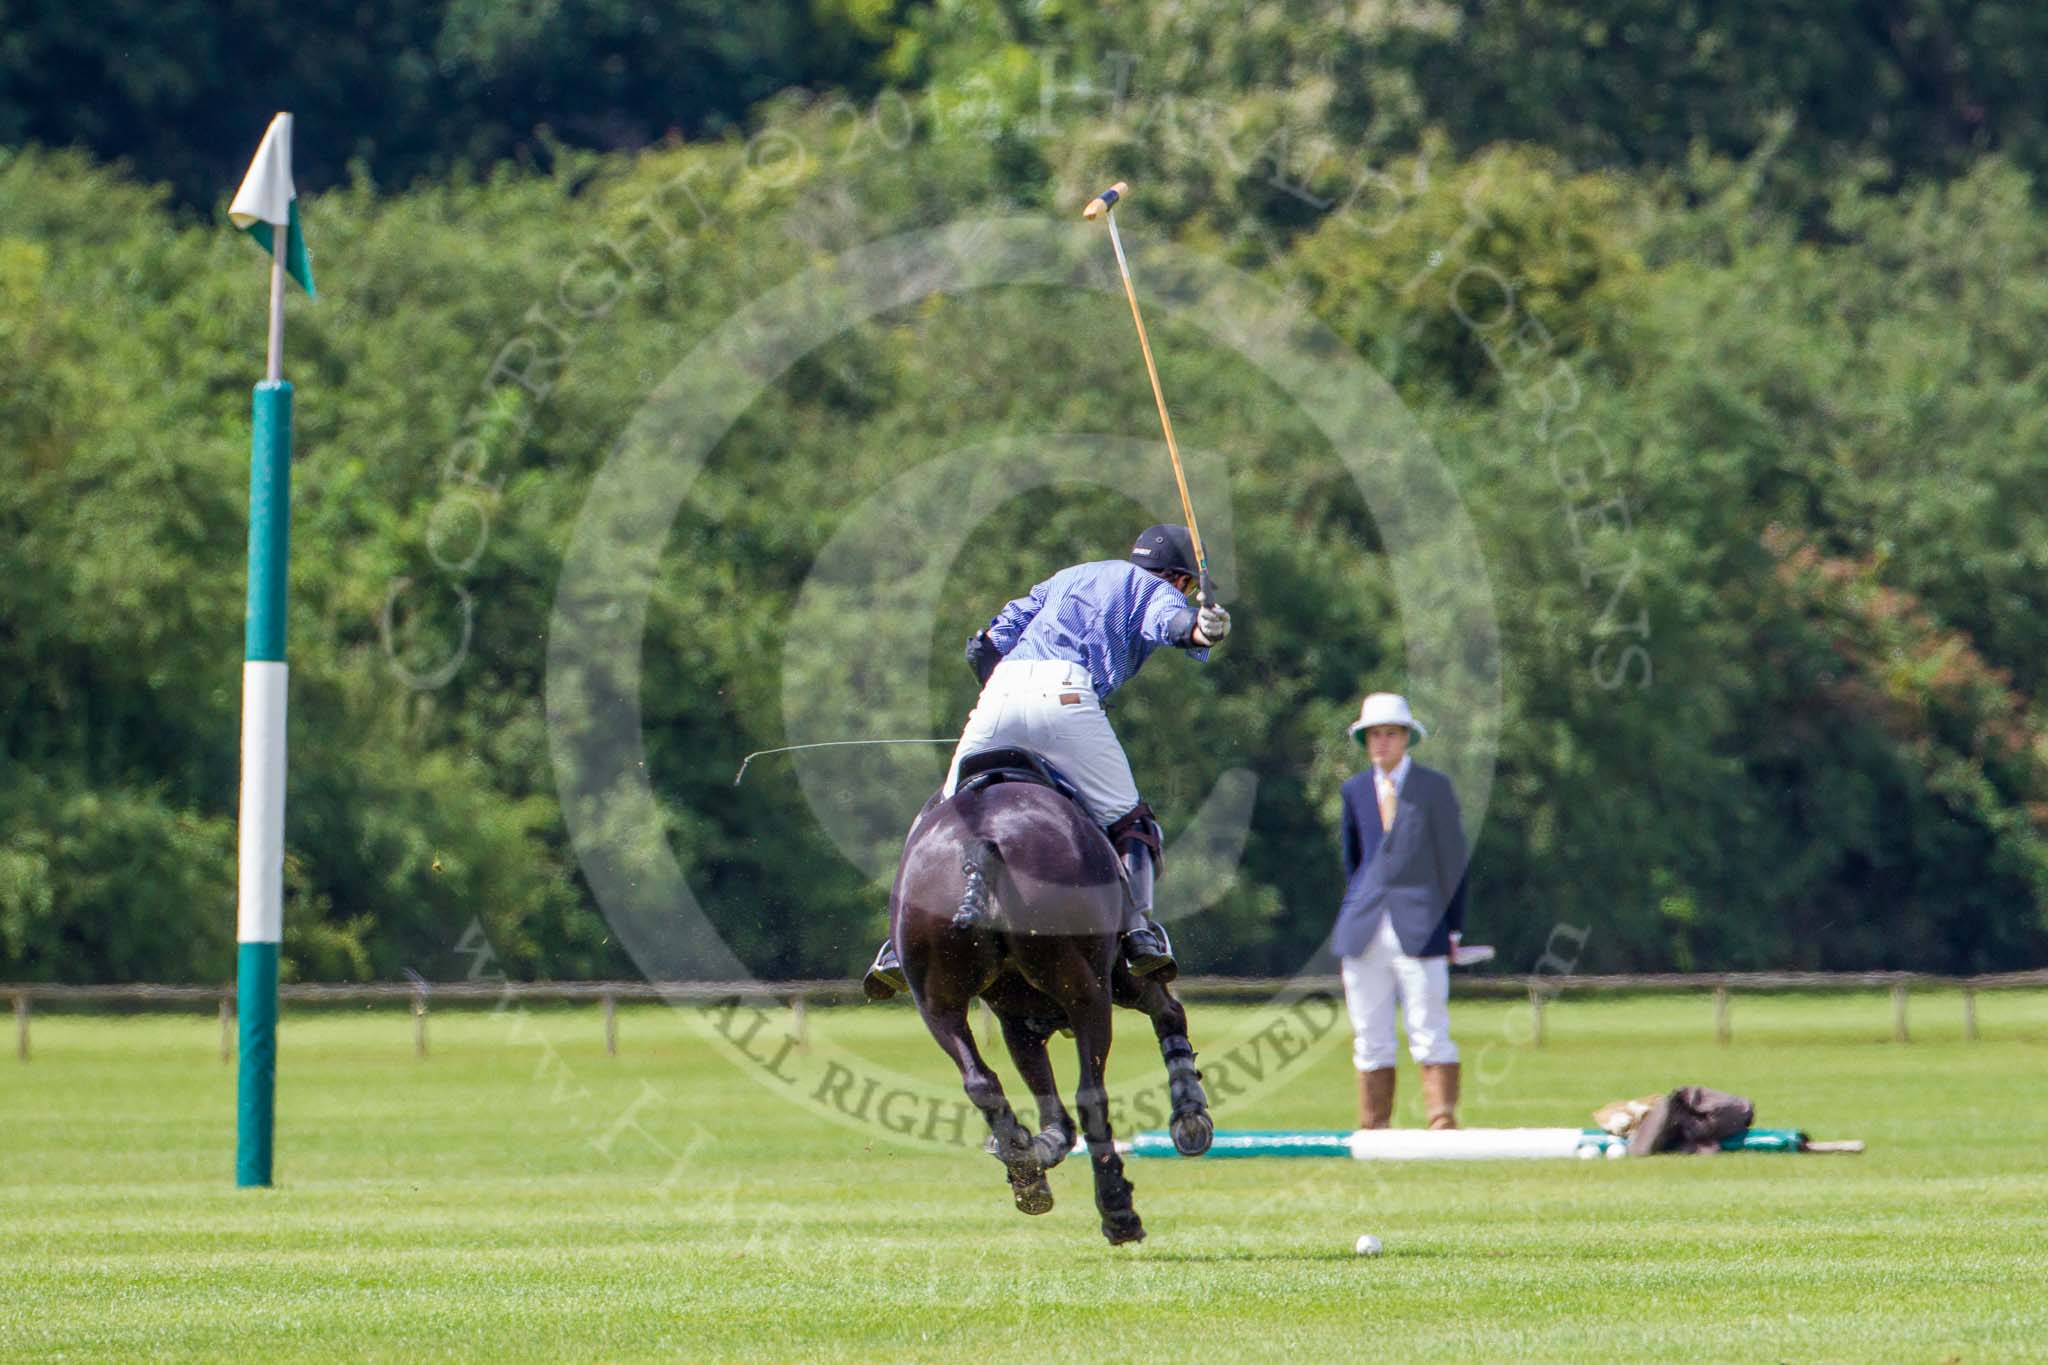 7th Heritage Polo Cup finals: John Martin, left, and Sebastian Funes..
Hurtwood Park Polo Club,
Ewhurst Green,
Surrey,
United Kingdom,
on 05 August 2012 at 13:20, image #14